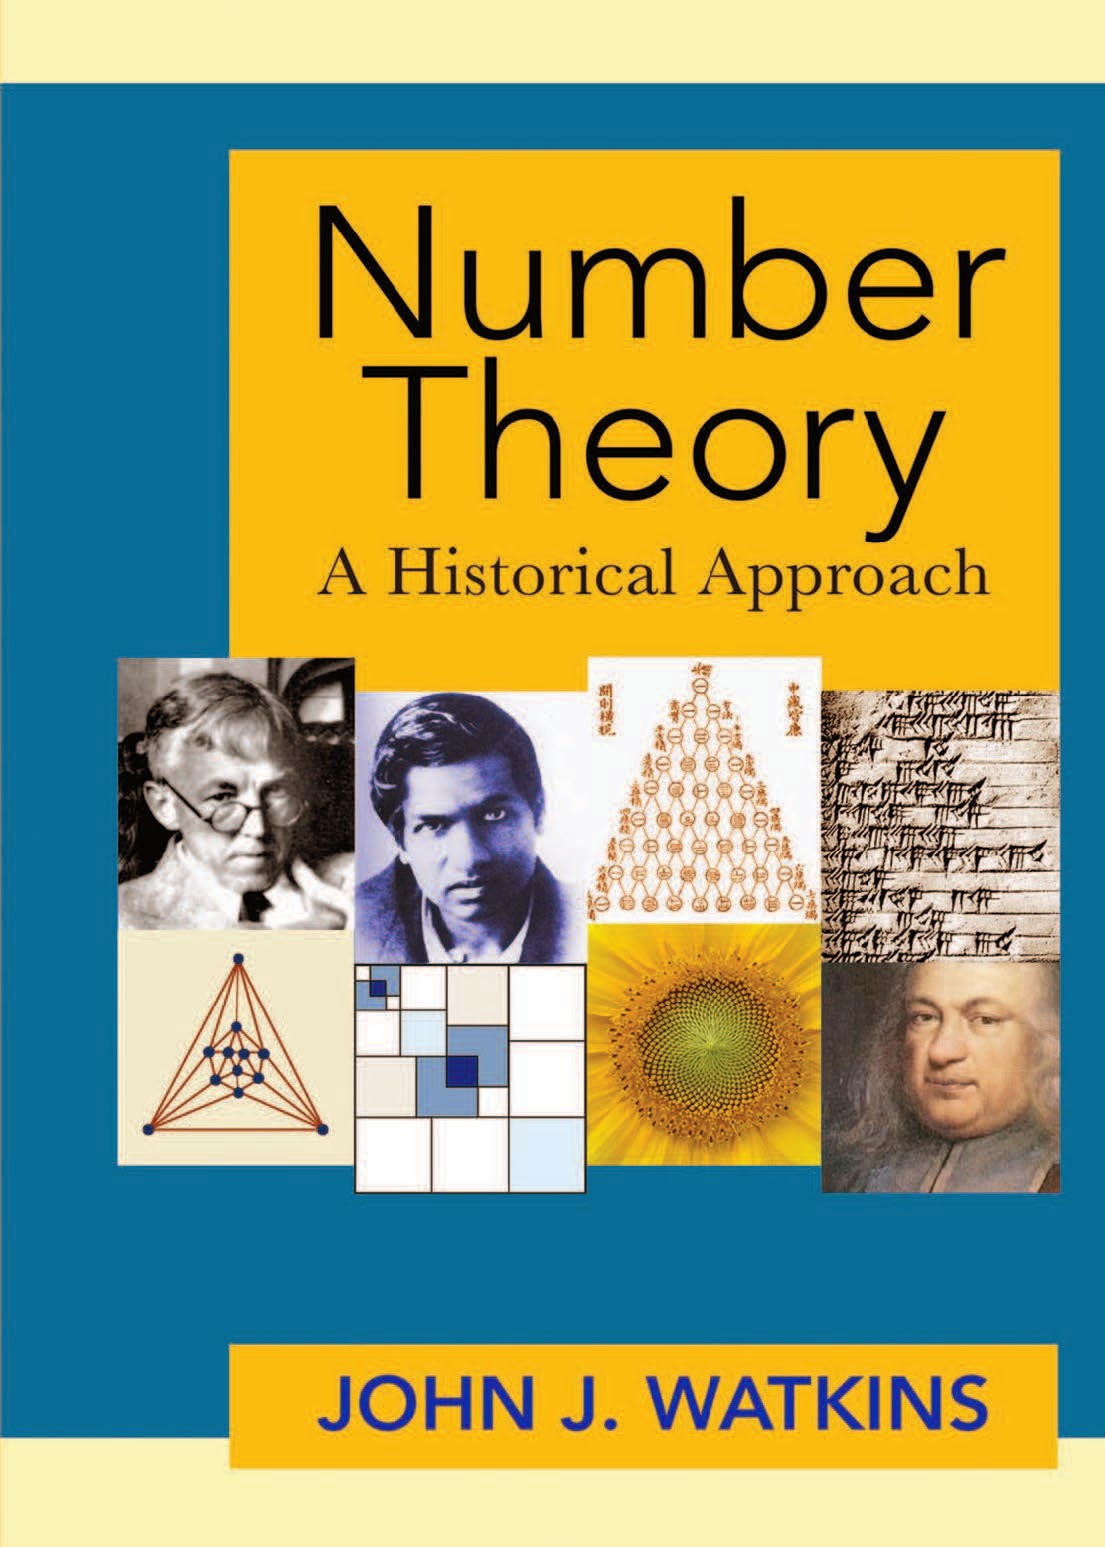  http://kingcheapebook.blogspot.com/2014/07/number-theory-historical-approach.html